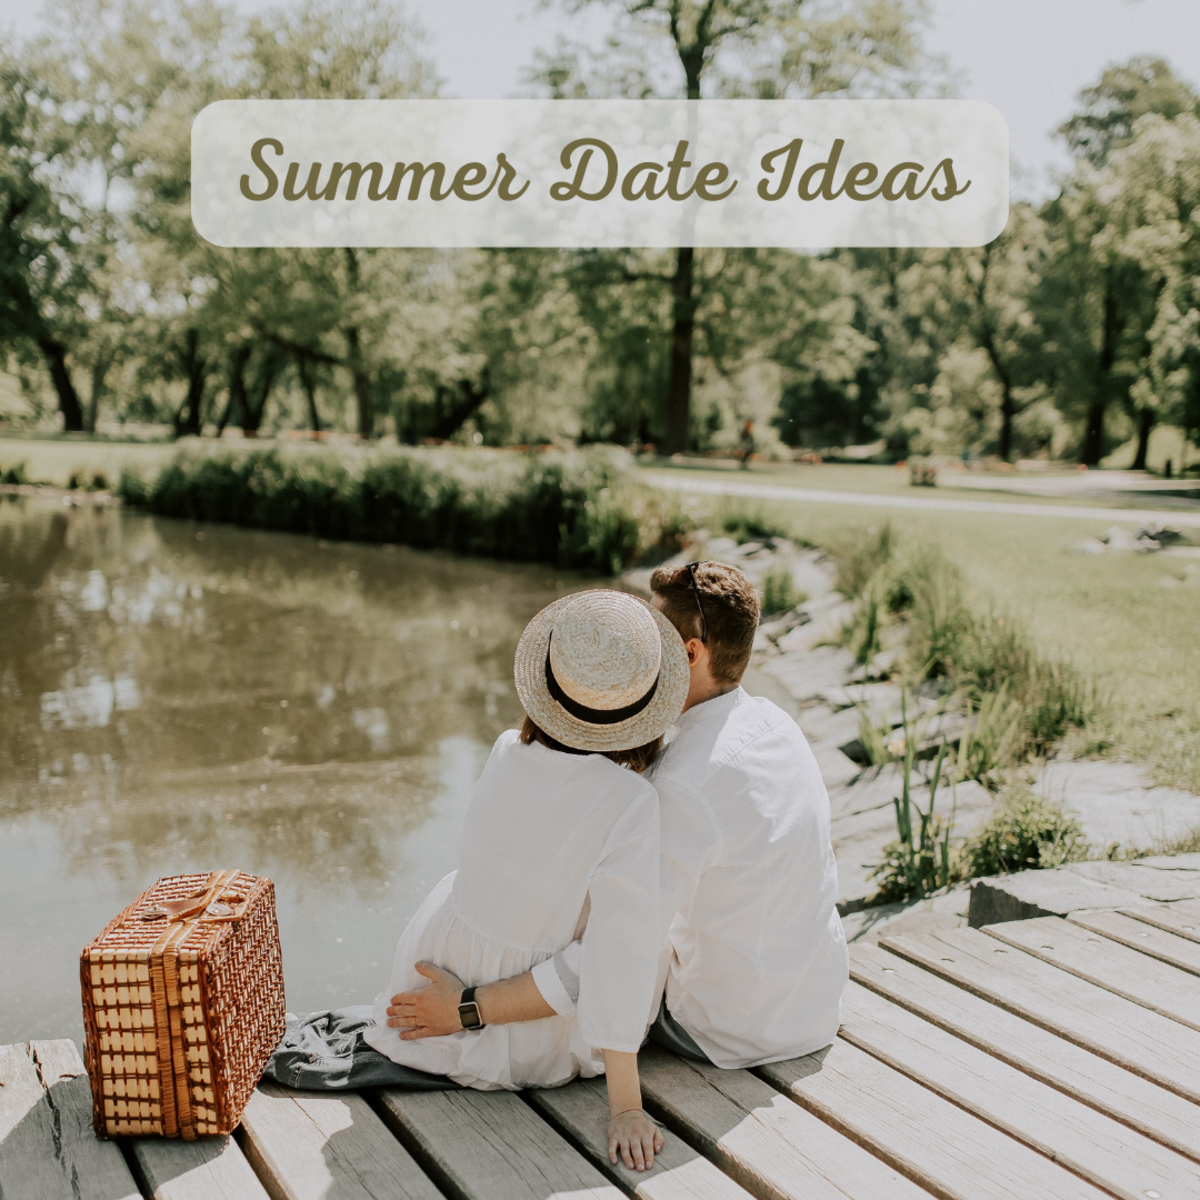 Summer Date Ideas: 20 Things to Do With Your Date in Warm Weather